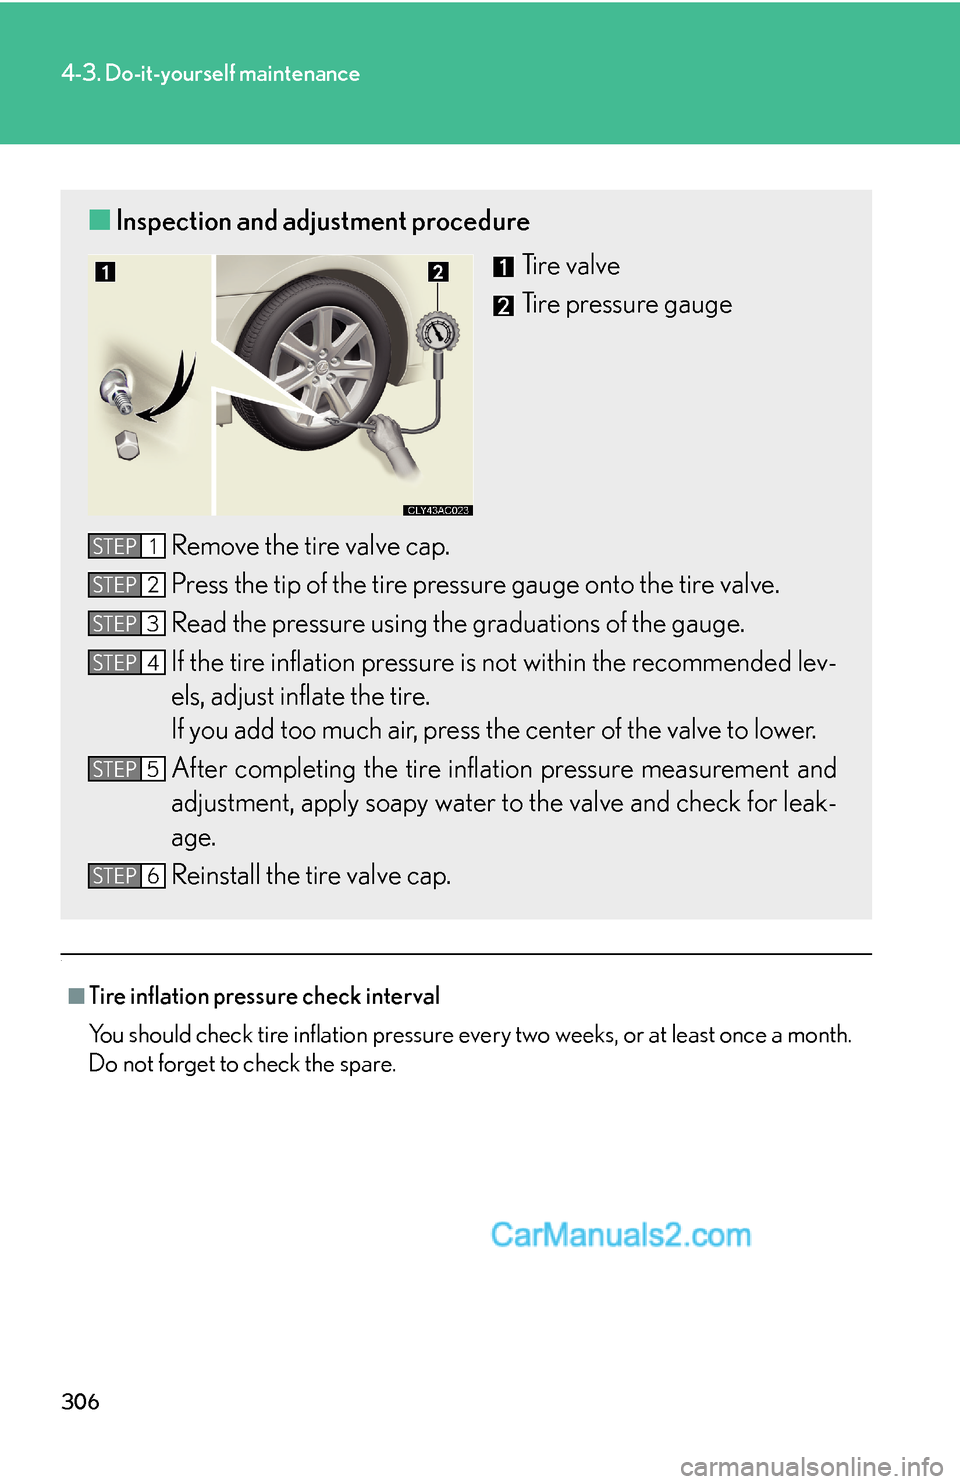 Lexus ES350 2007  Do-it-yourself maintenance 306
4-3. Do-it-yourself maintenance
.
■Tire inflation pressure check interval
You should check tire inflation pressure every two weeks, or at least once a month.
Do not forget to check the spare.
�